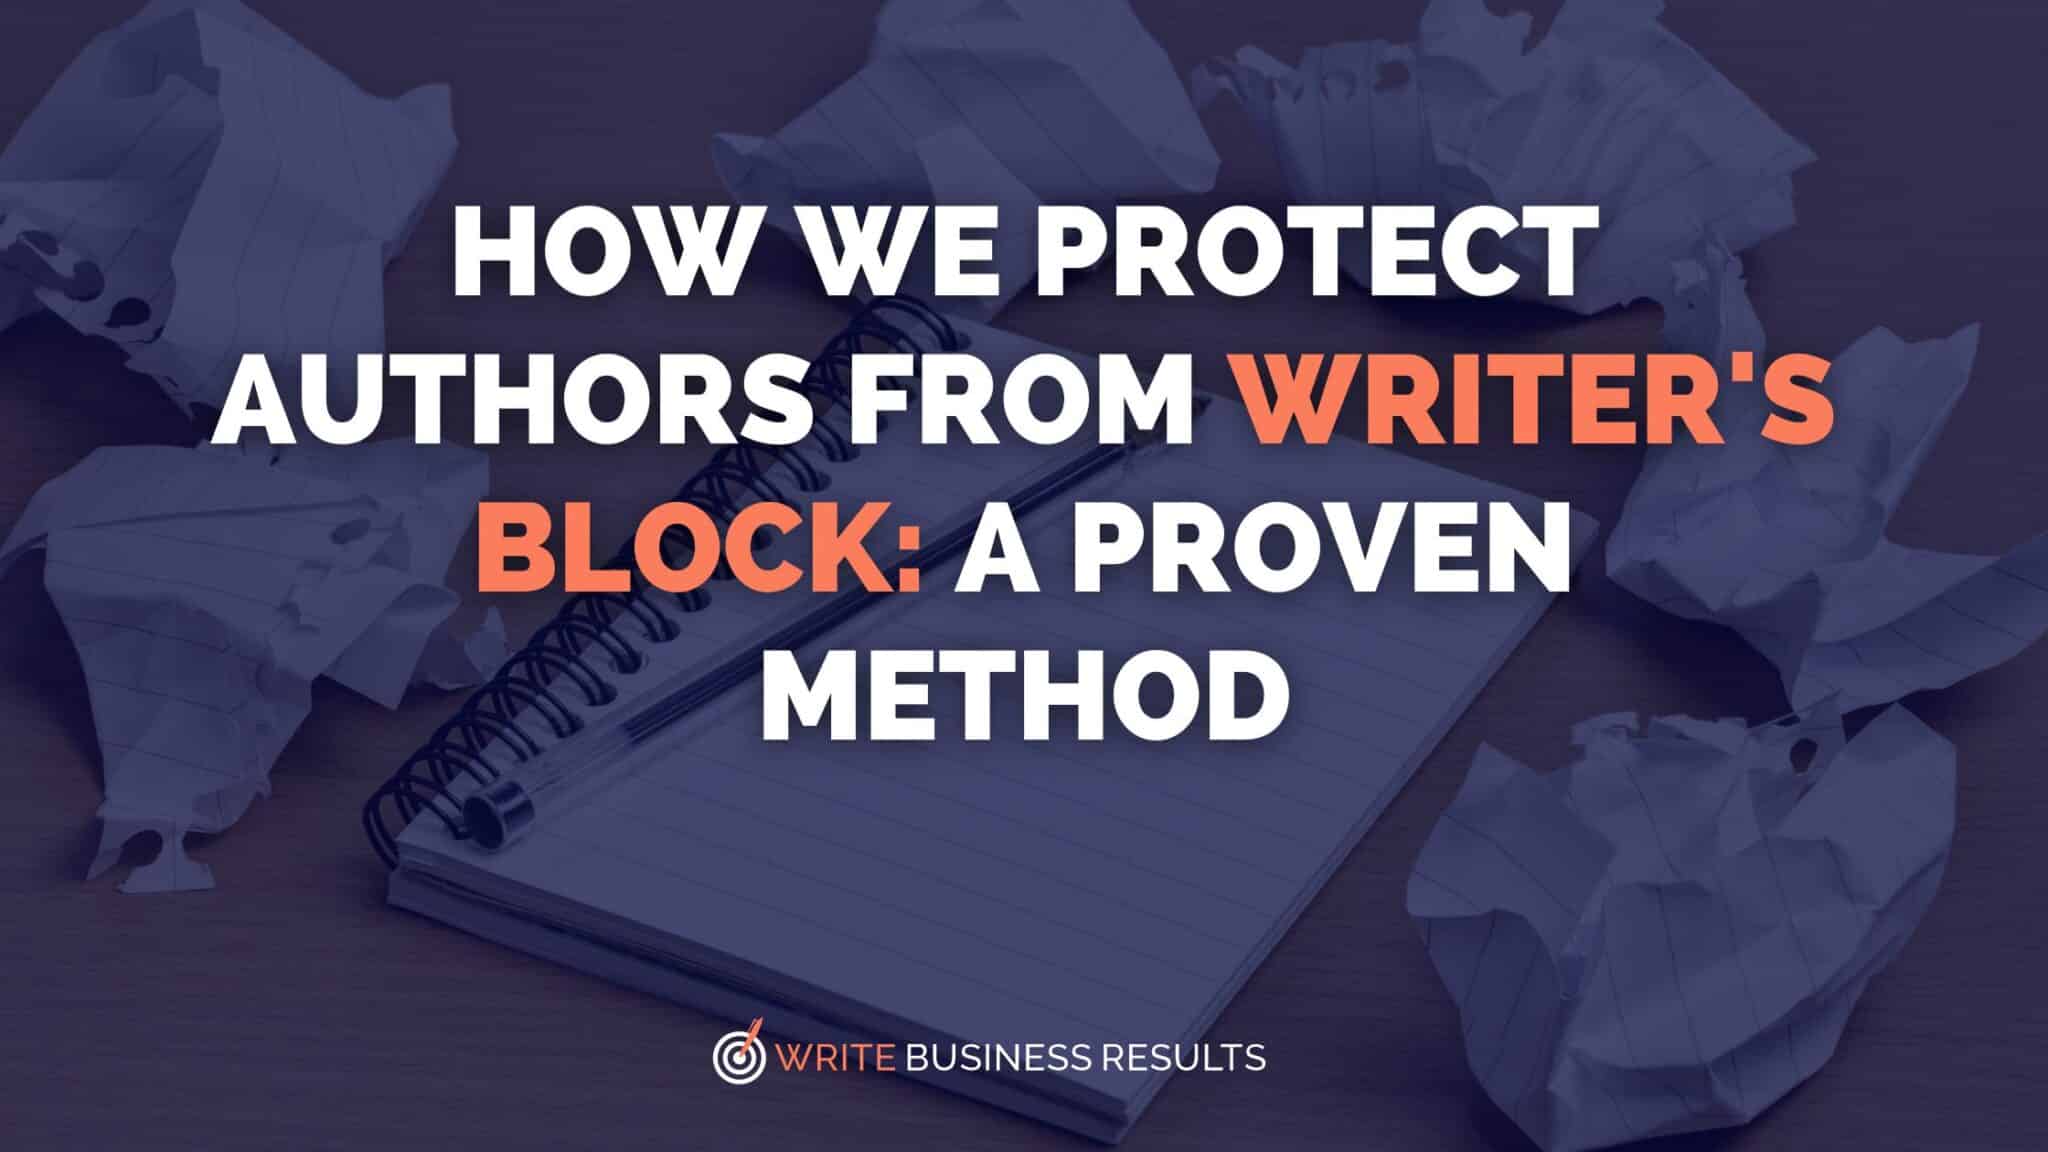 How We Protect Authors From Writer’s Block: A Proven Method